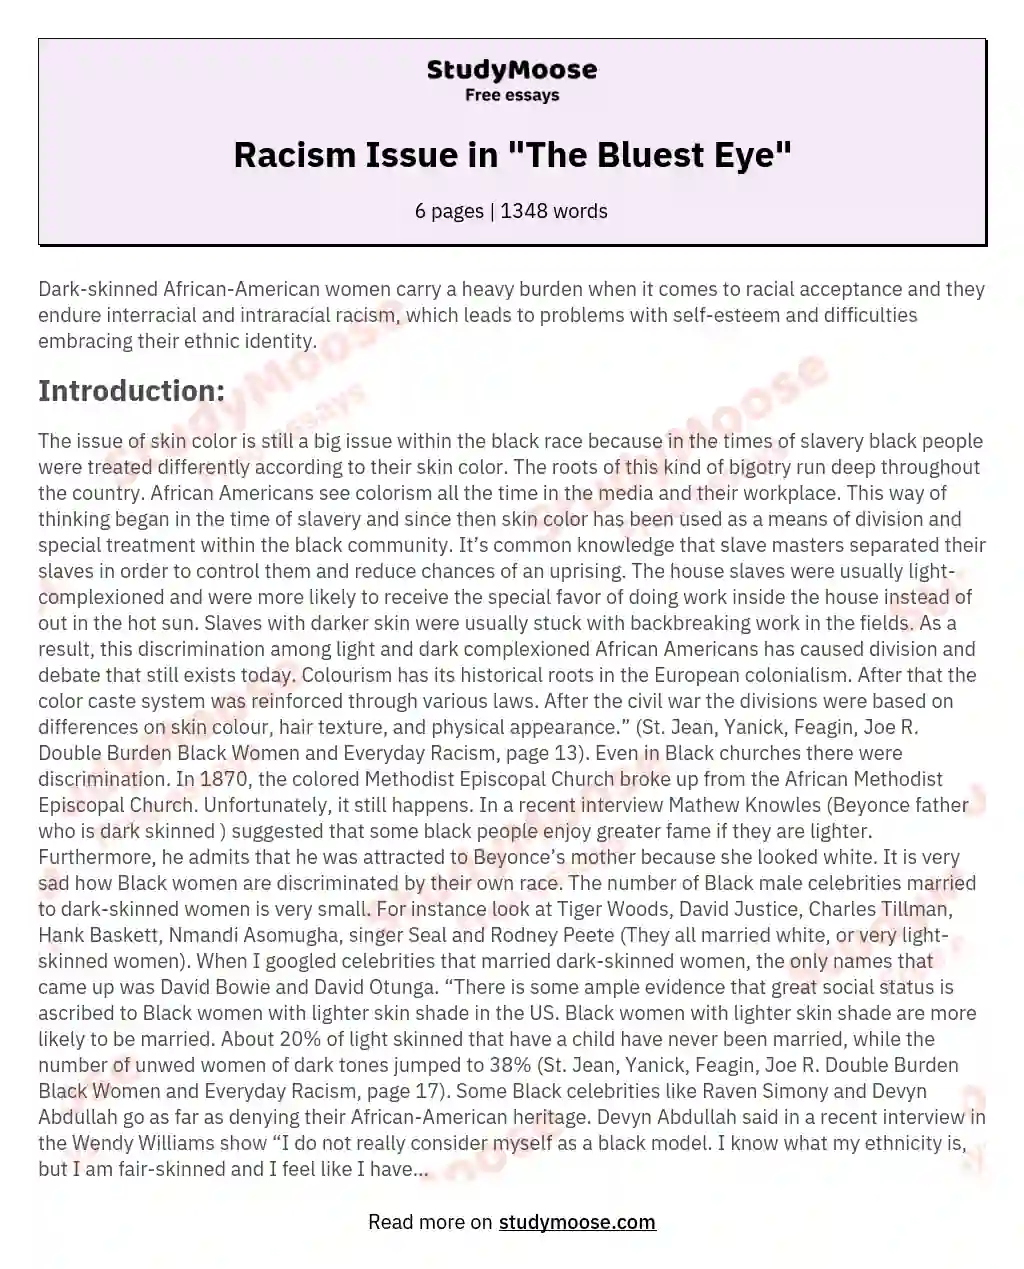 Racism Issue in "The Bluest Eye" essay